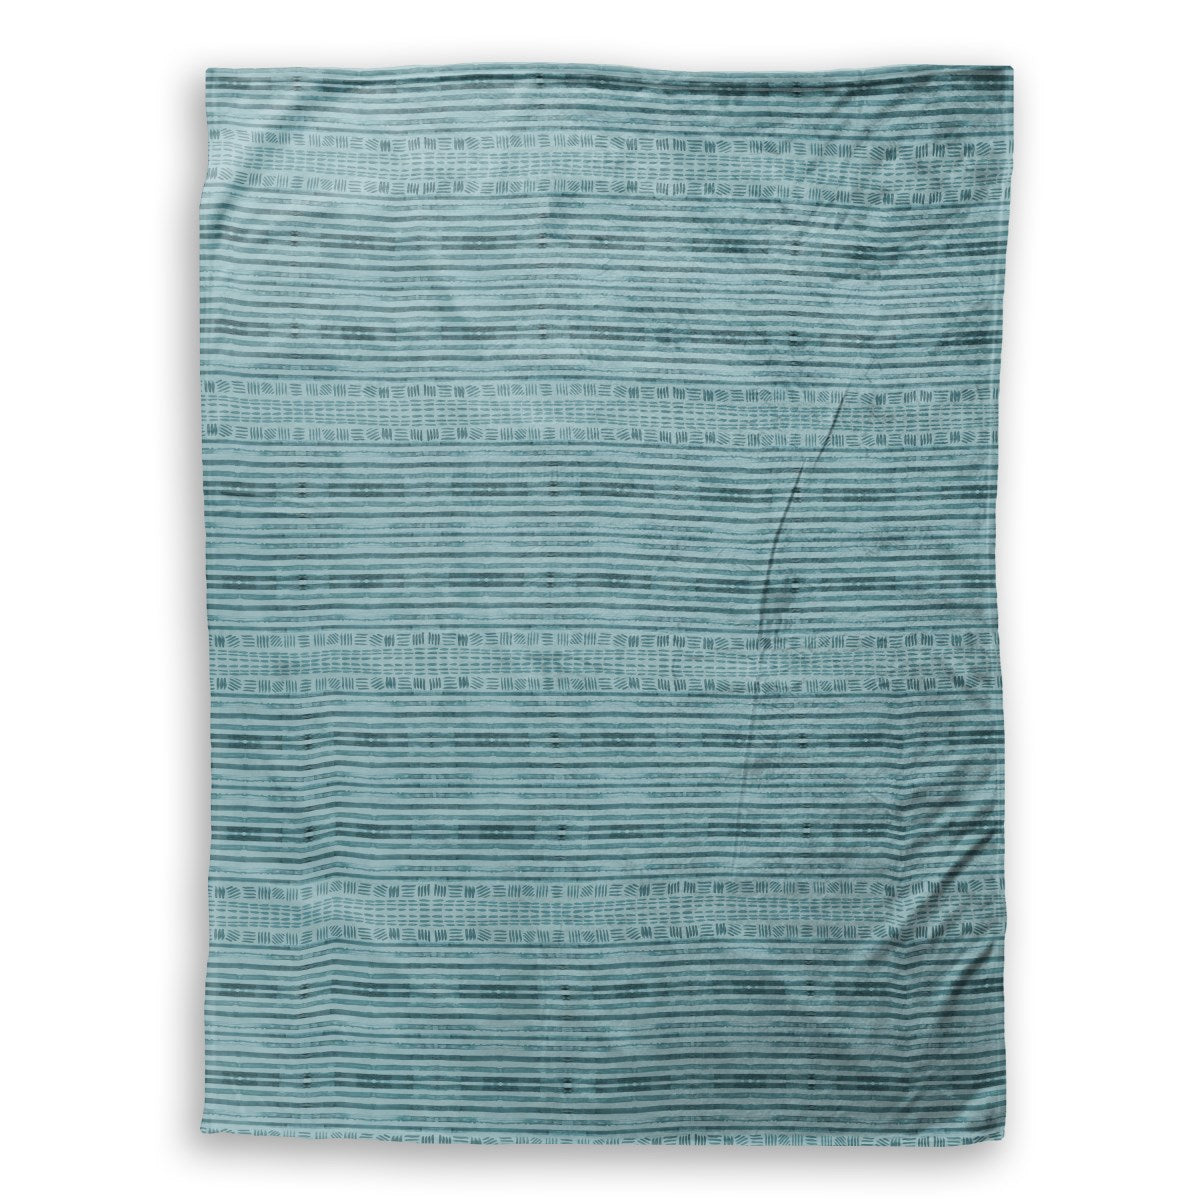 Blue and light blue striped and patterned throw blanket - large 60 x 80